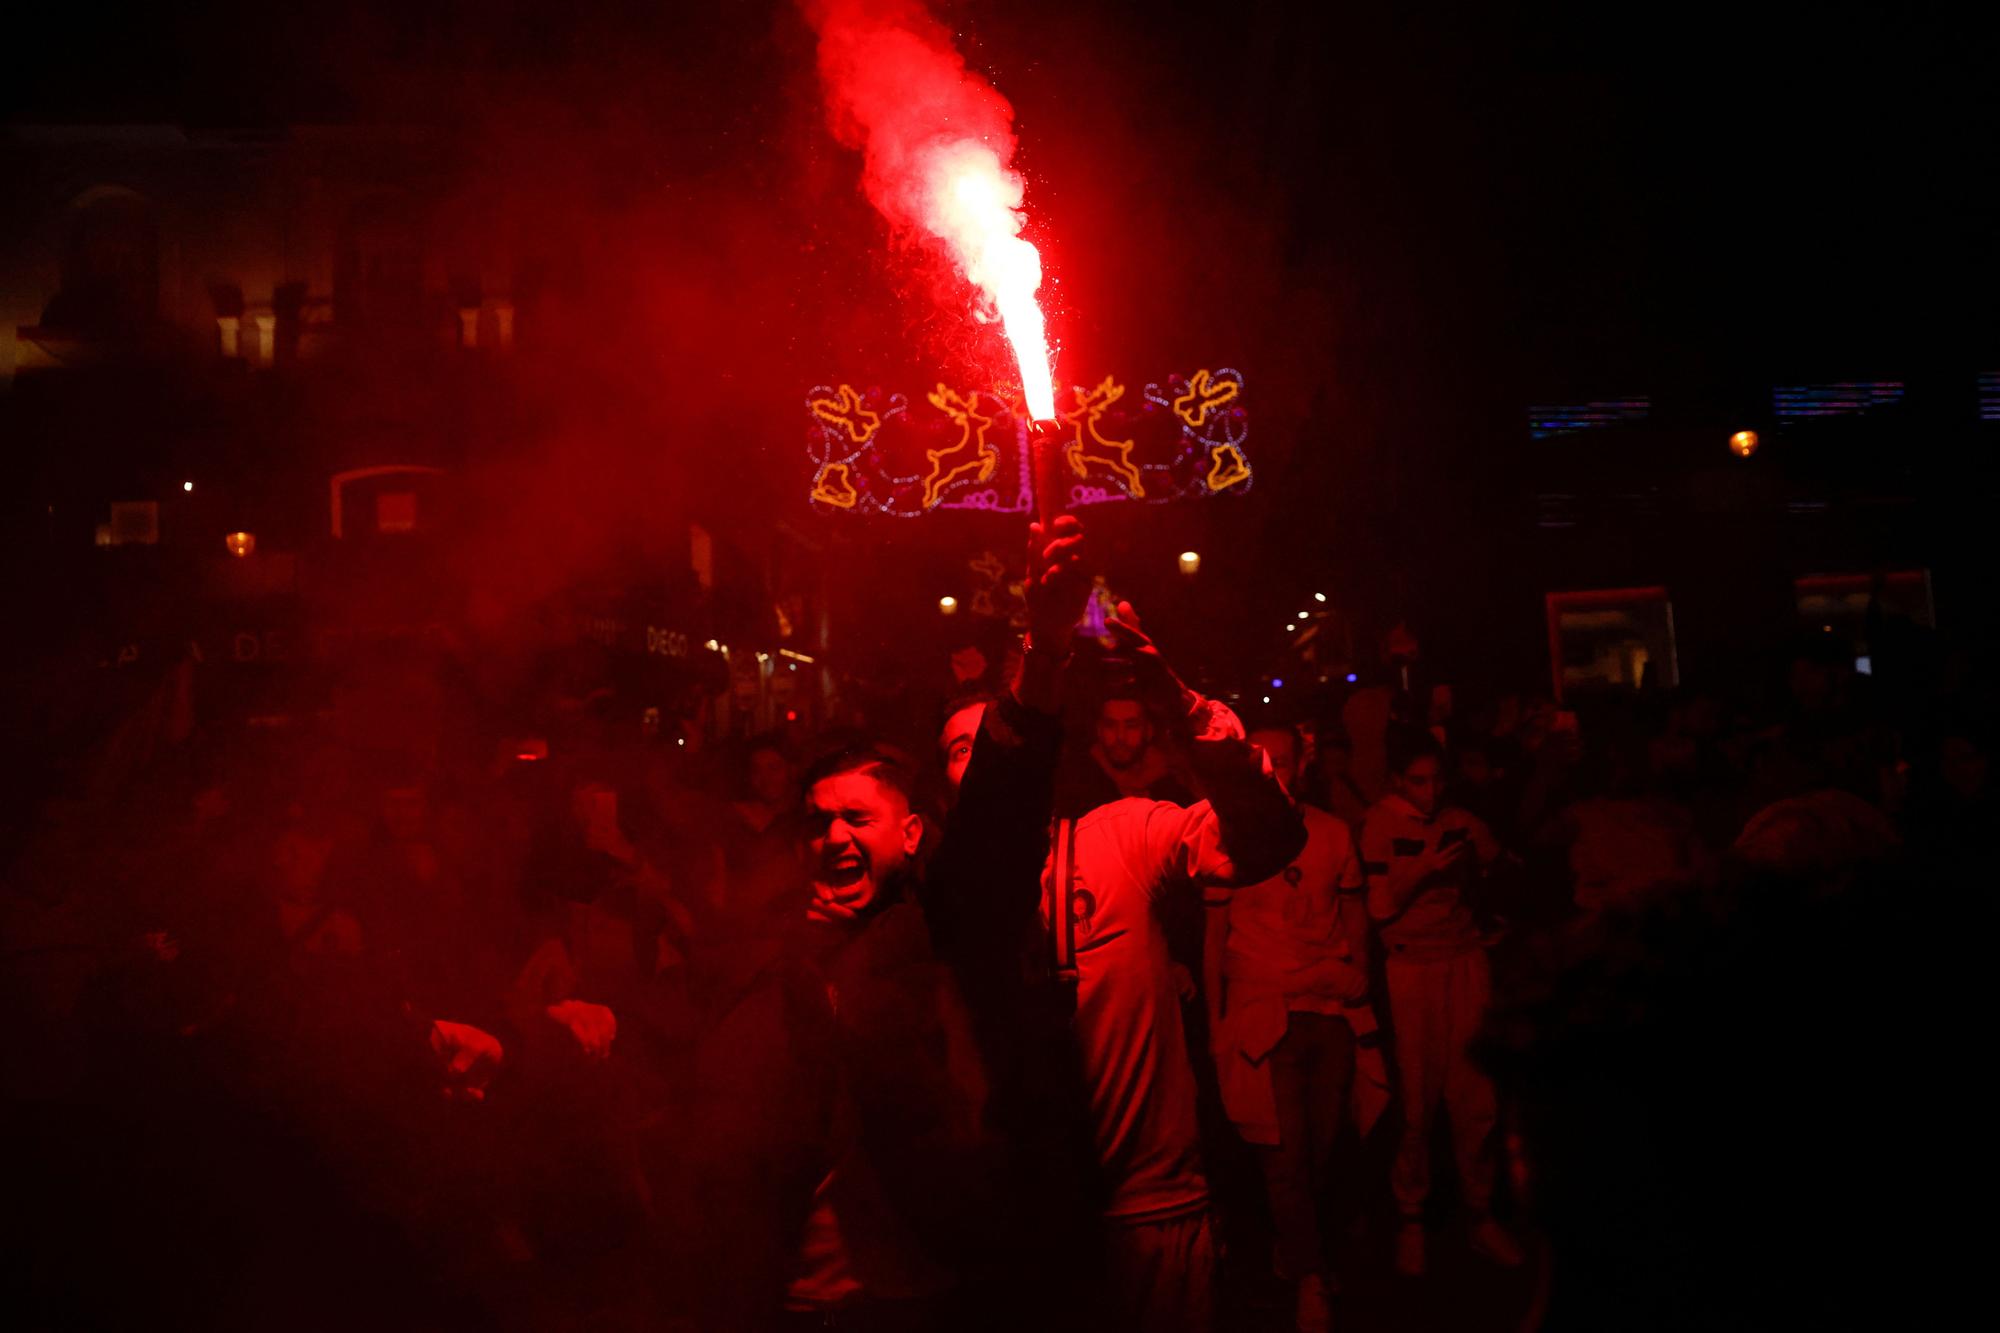 Morocco fans celebrate as they gather in Sol square after the FIFA World Cup Qatar 2022 match between Spain and Morocco, in Madrid